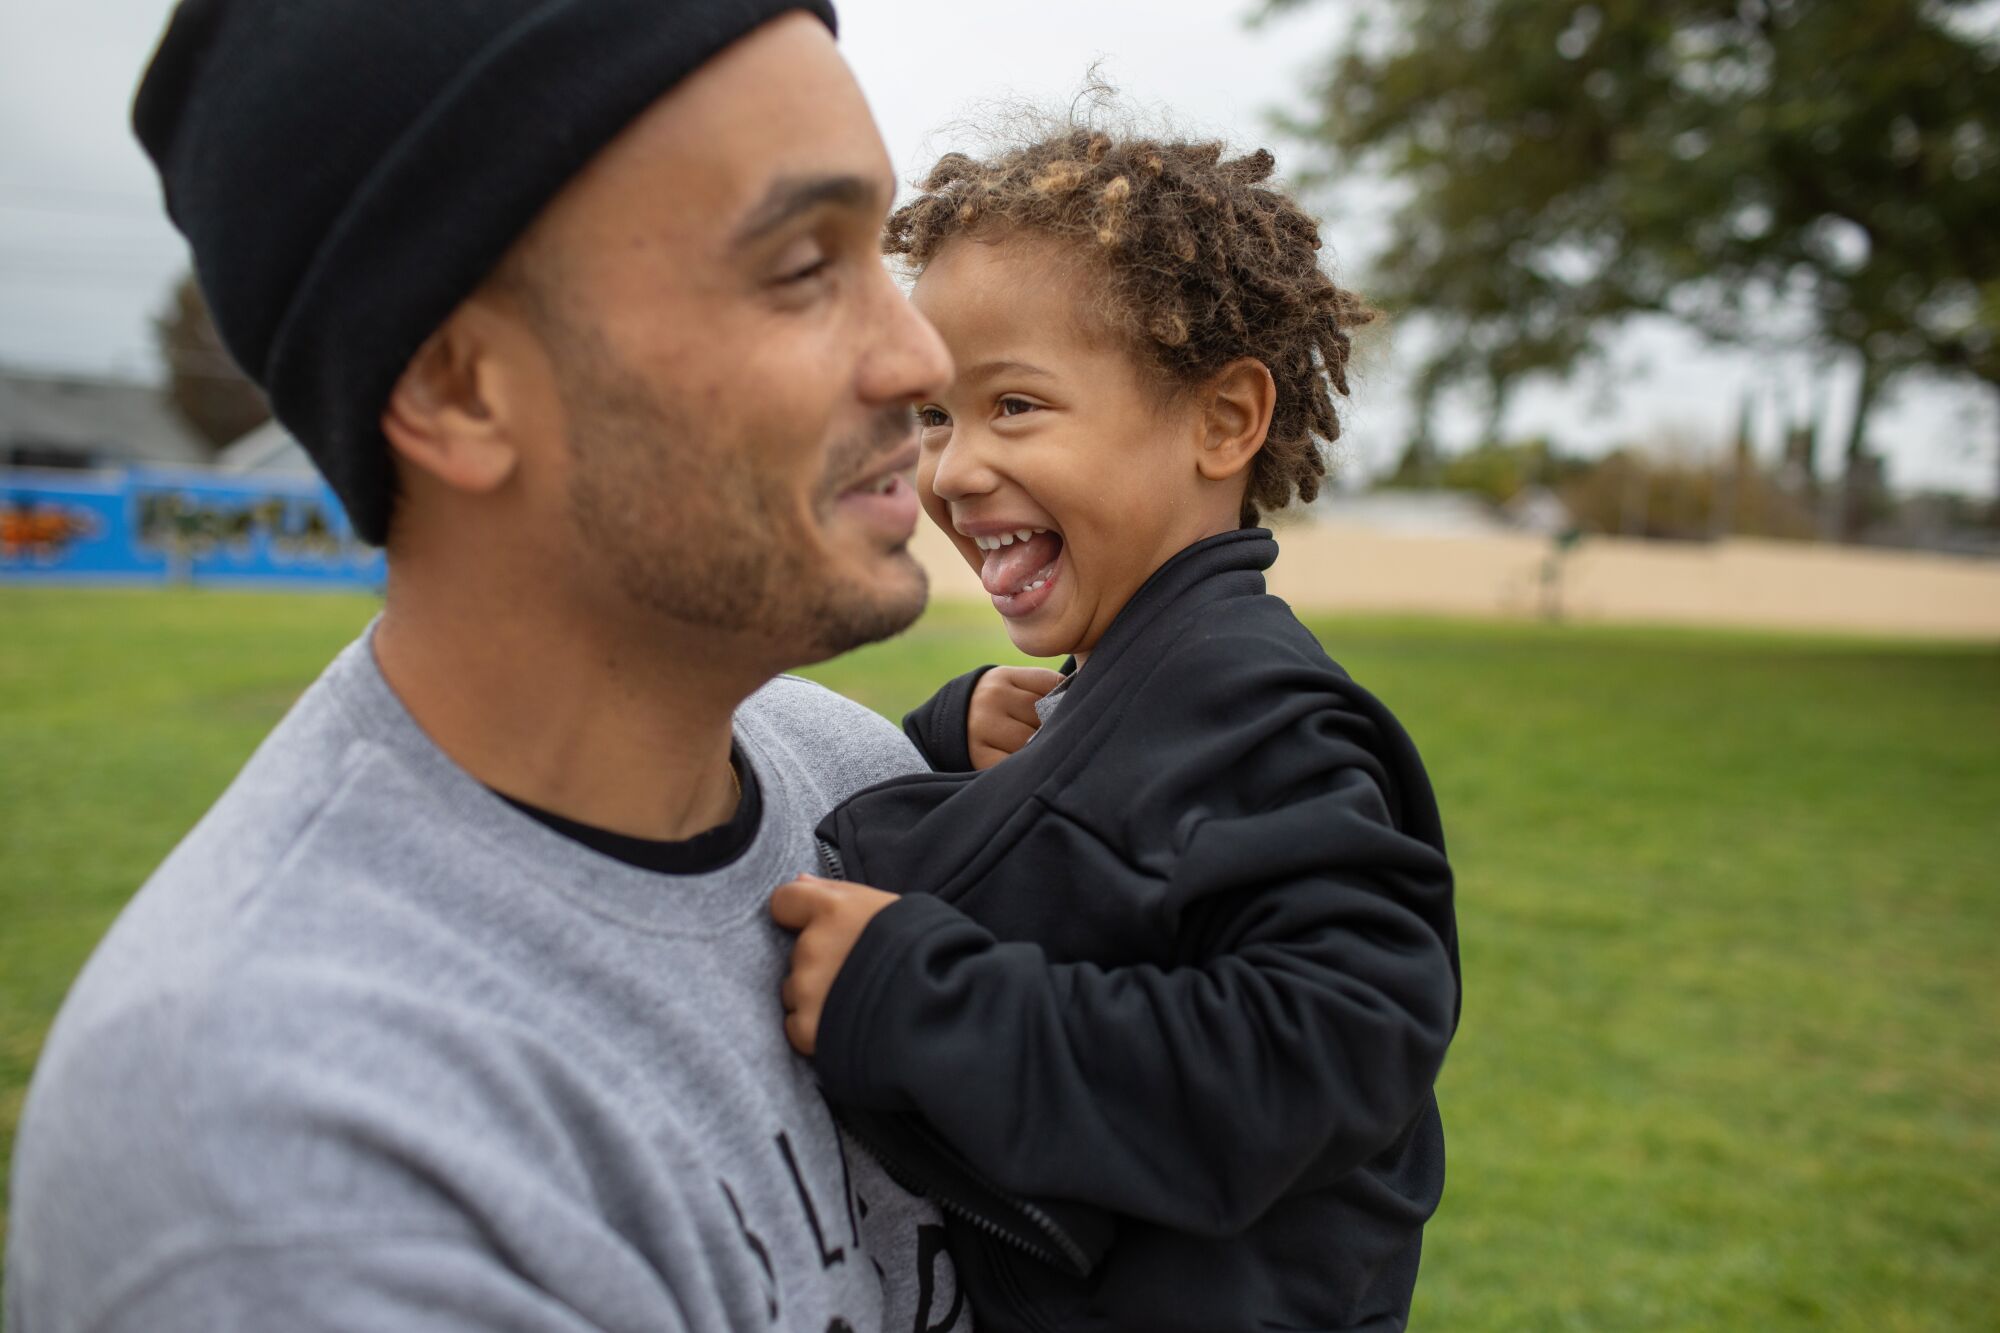 Amanu Brown, 3, laughs with his father, Bobby, at an Inglewood park.